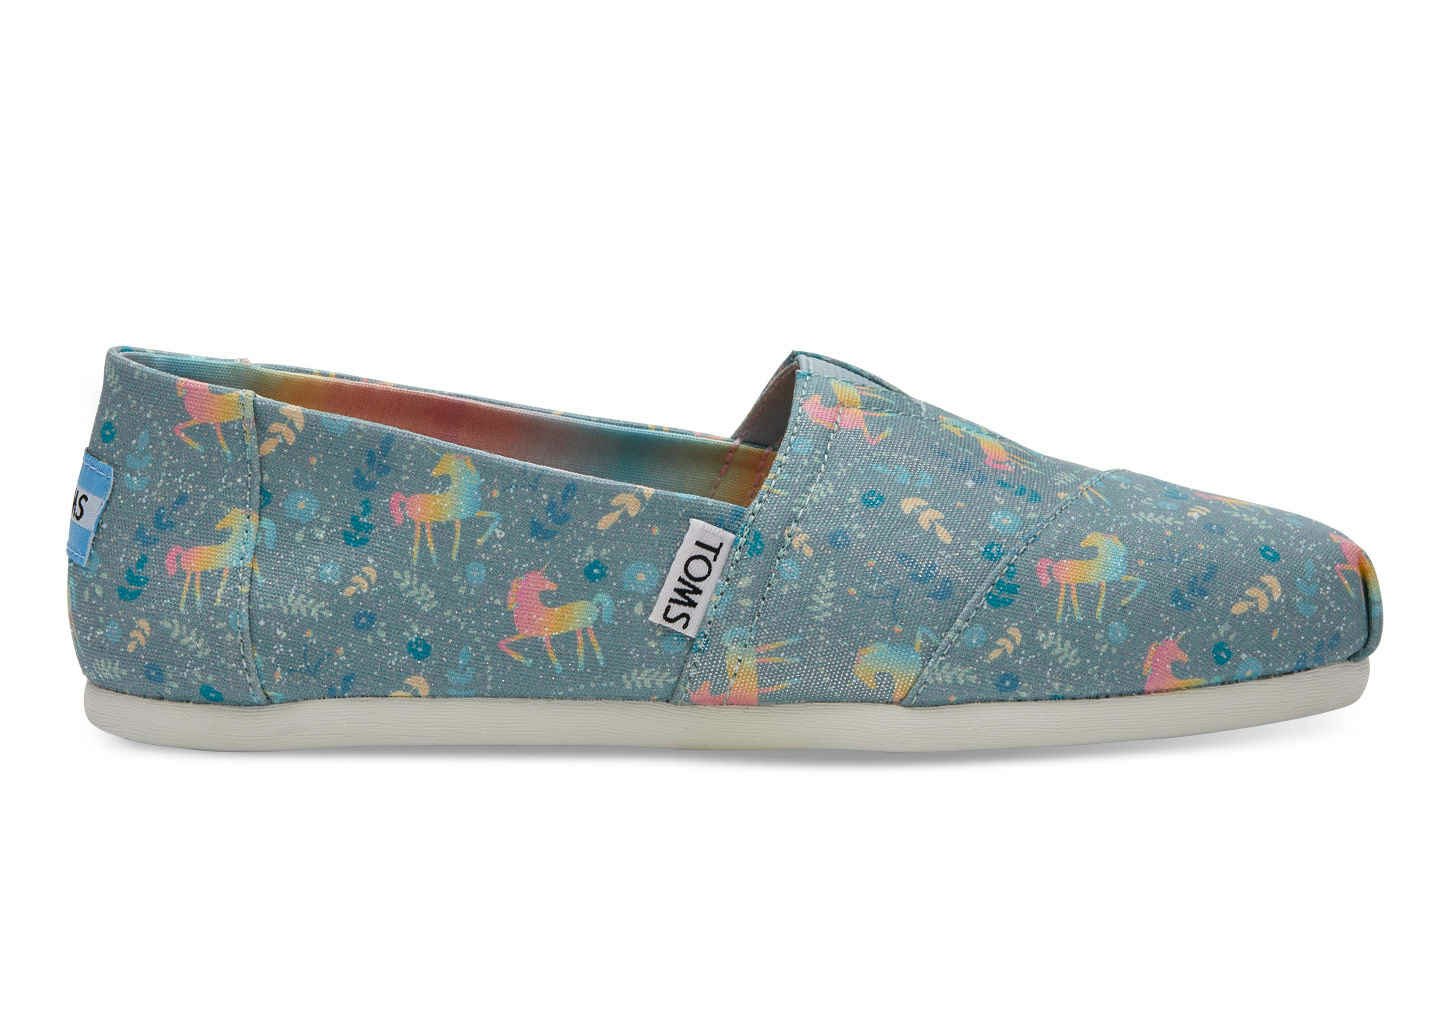 Where To Buy TOMS' Unicorn Shoes If You 